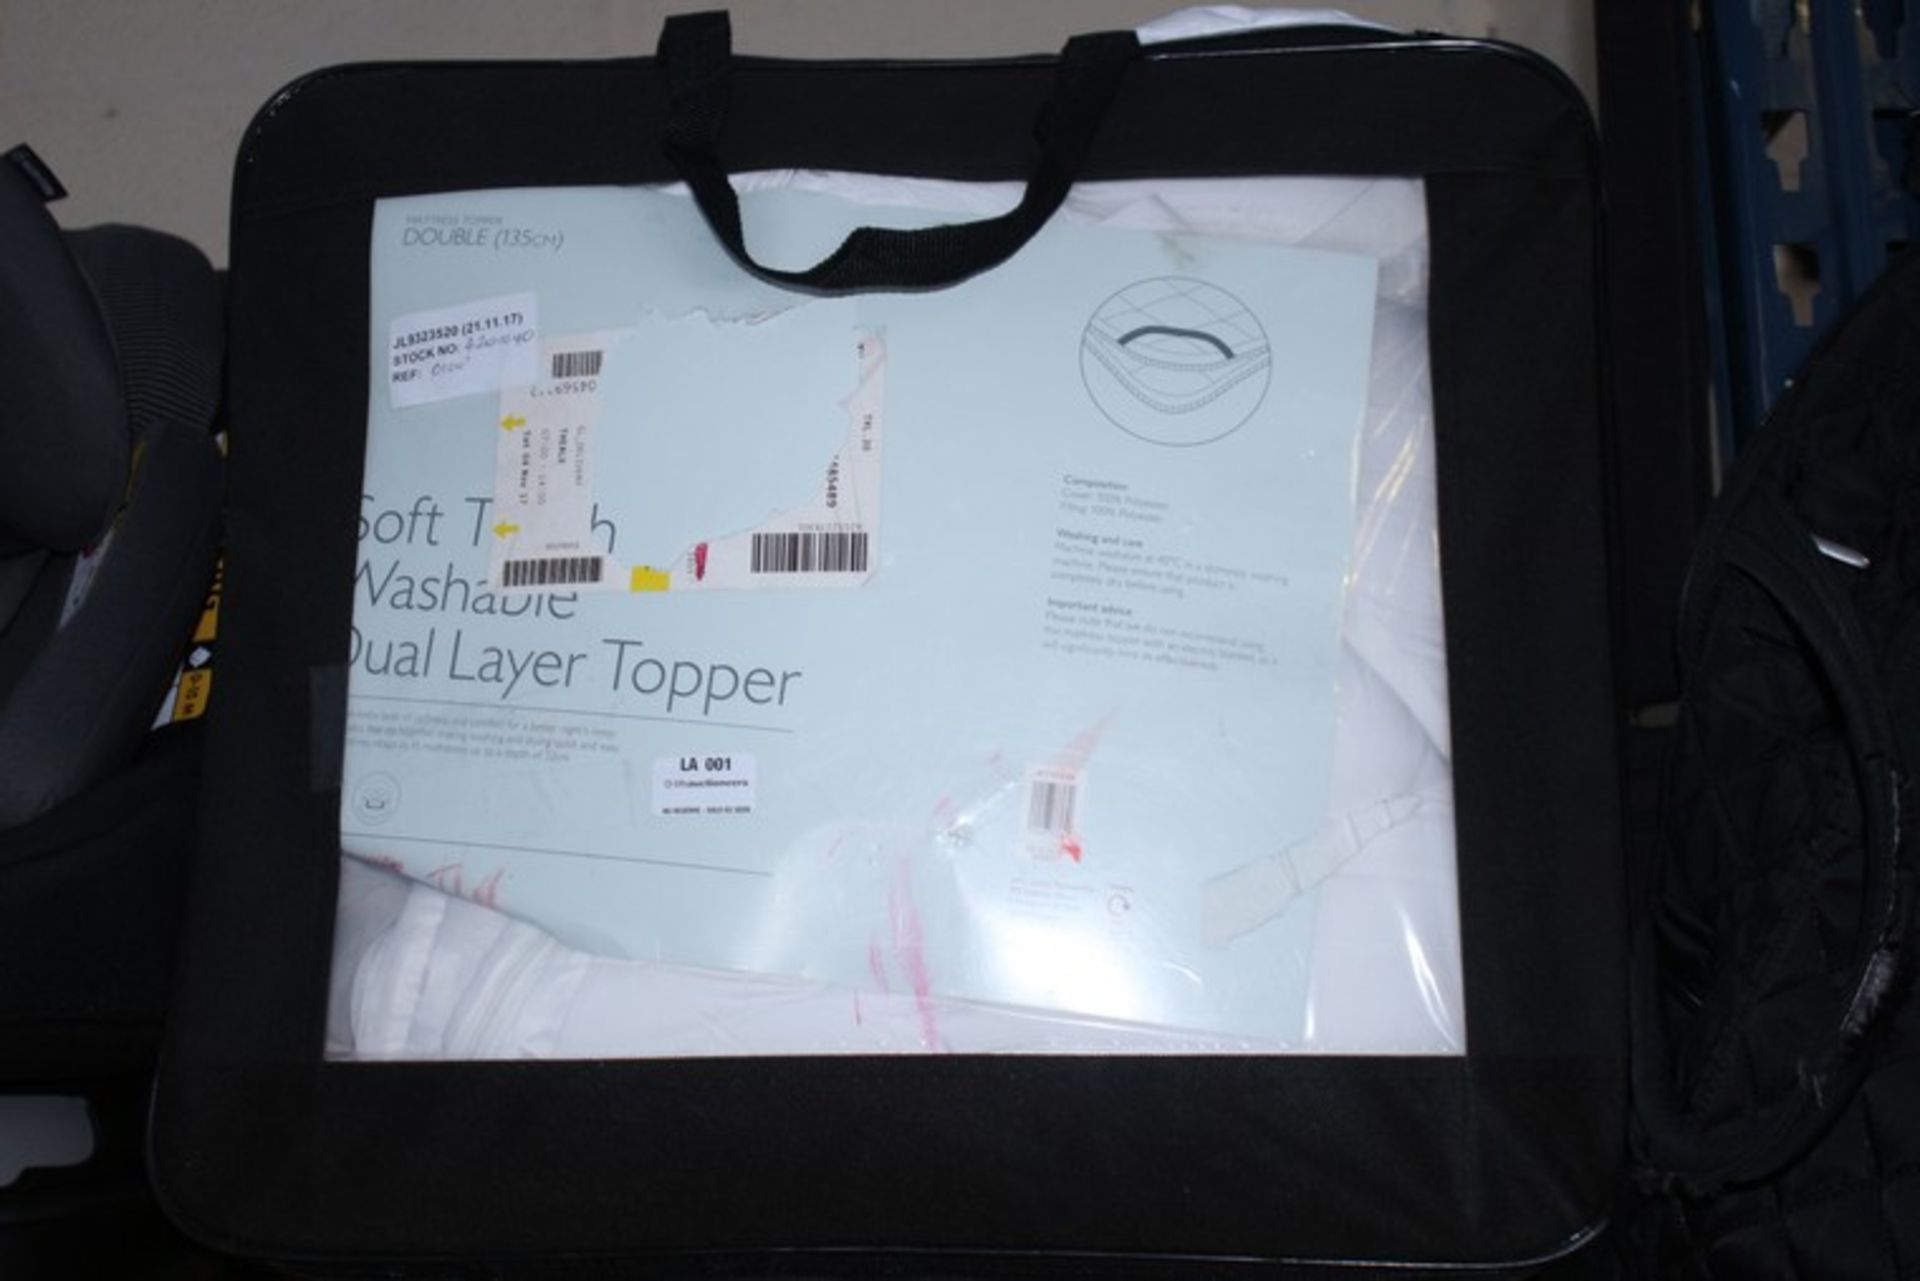 1 x BAGGED SOFT TOUCH WASHABLE DUAL LAYERED TOPPER RRP £100 (21/11/17) (4021040) *PLEASE NOTE THAT